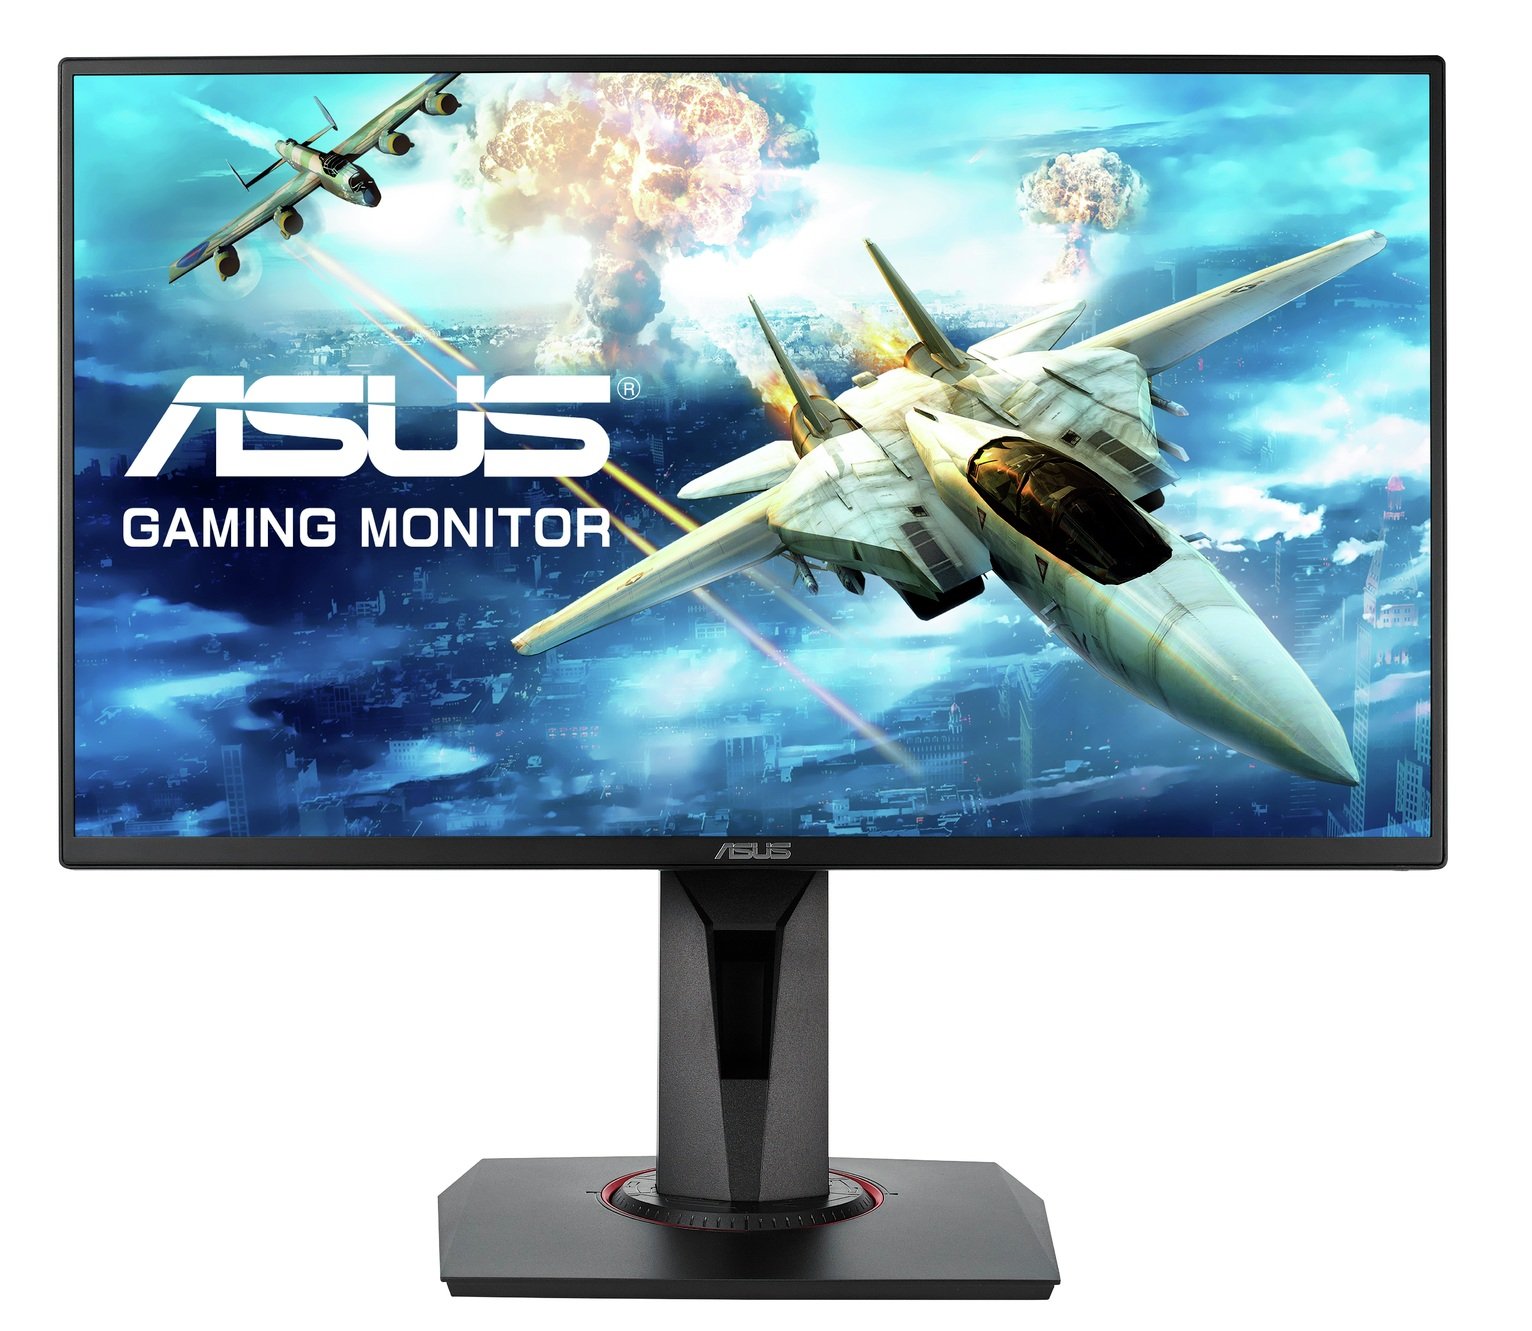 ASUS VG258QR 24.5 Inch FHD LED Monitor Review